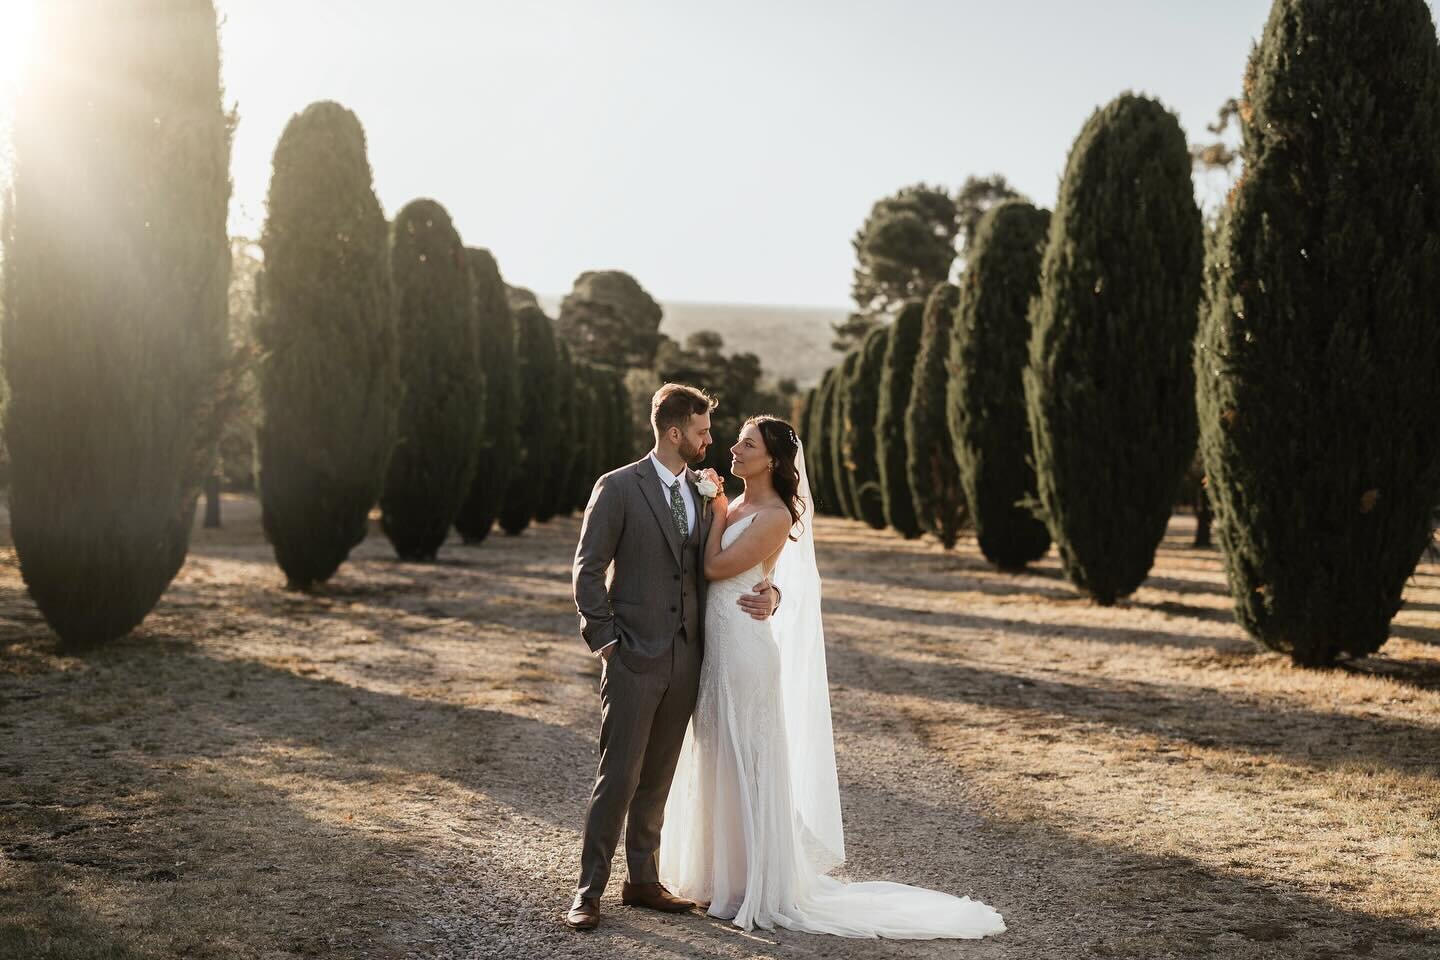 P R U E +  B R A D

Prue and Brad&rsquo;s love is like a melody composed of understanding, support, and unwavering commitment. Their bond is a testament to the power of connection, as they navigate life&rsquo;s journey hand in hand, their hearts harm